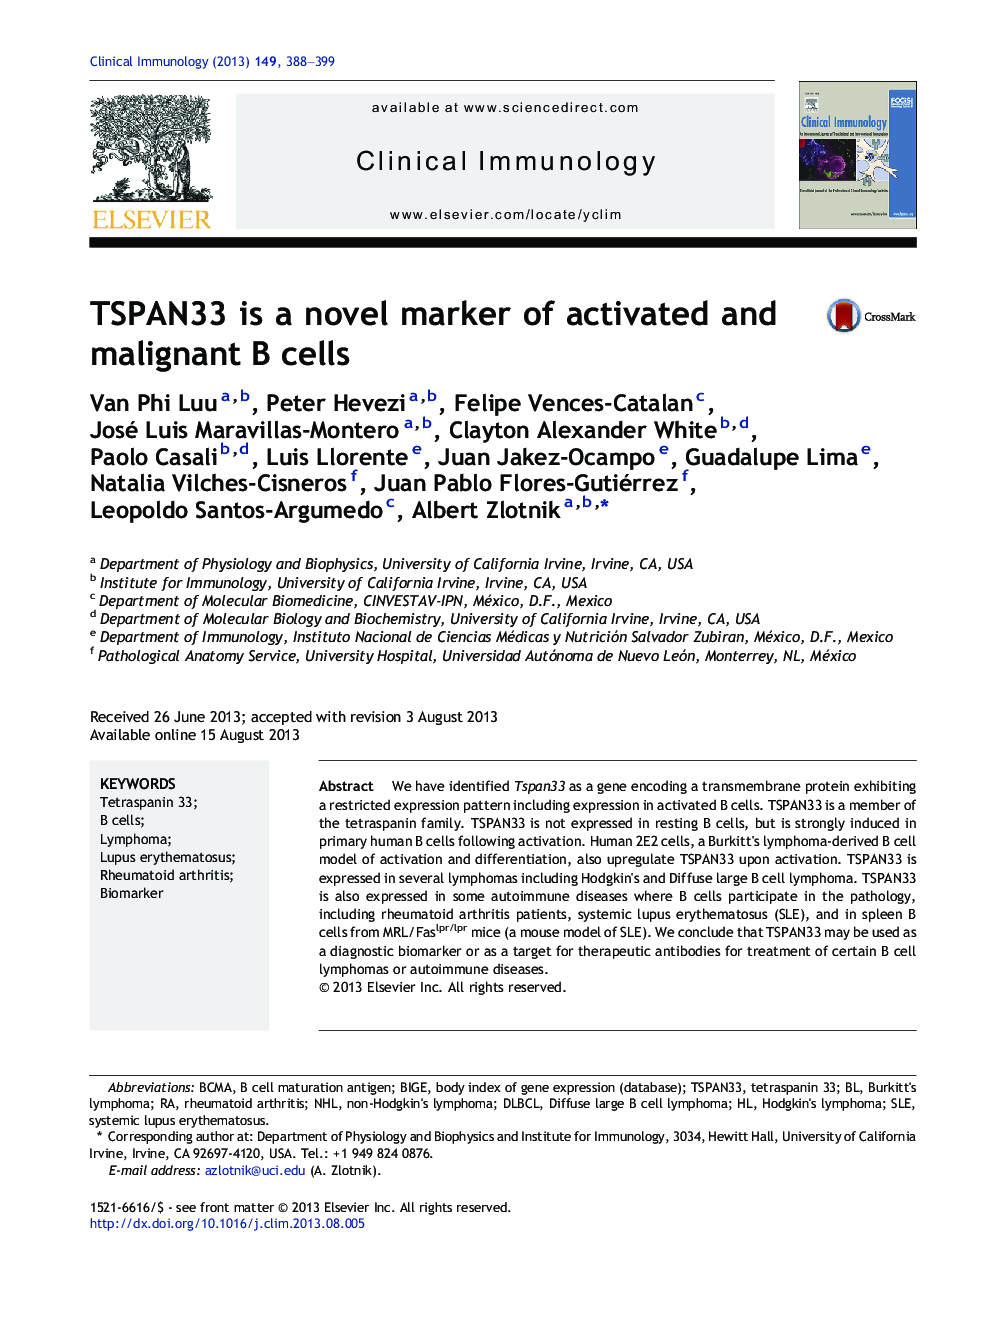 TSPAN33 is a novel marker of activated and malignant B cells